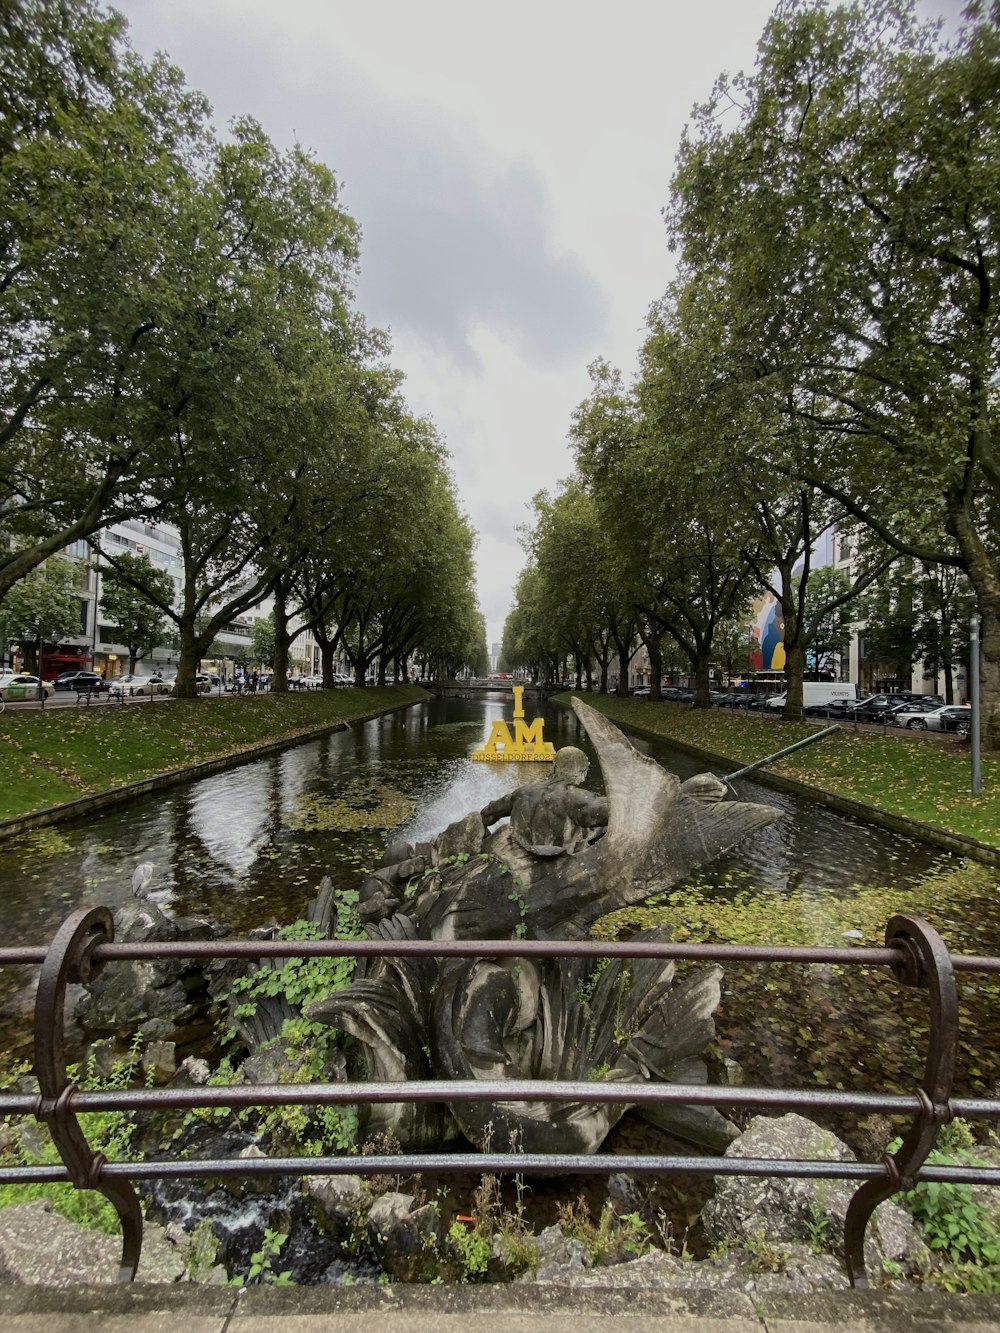 a statue of a man riding a horse in a canal